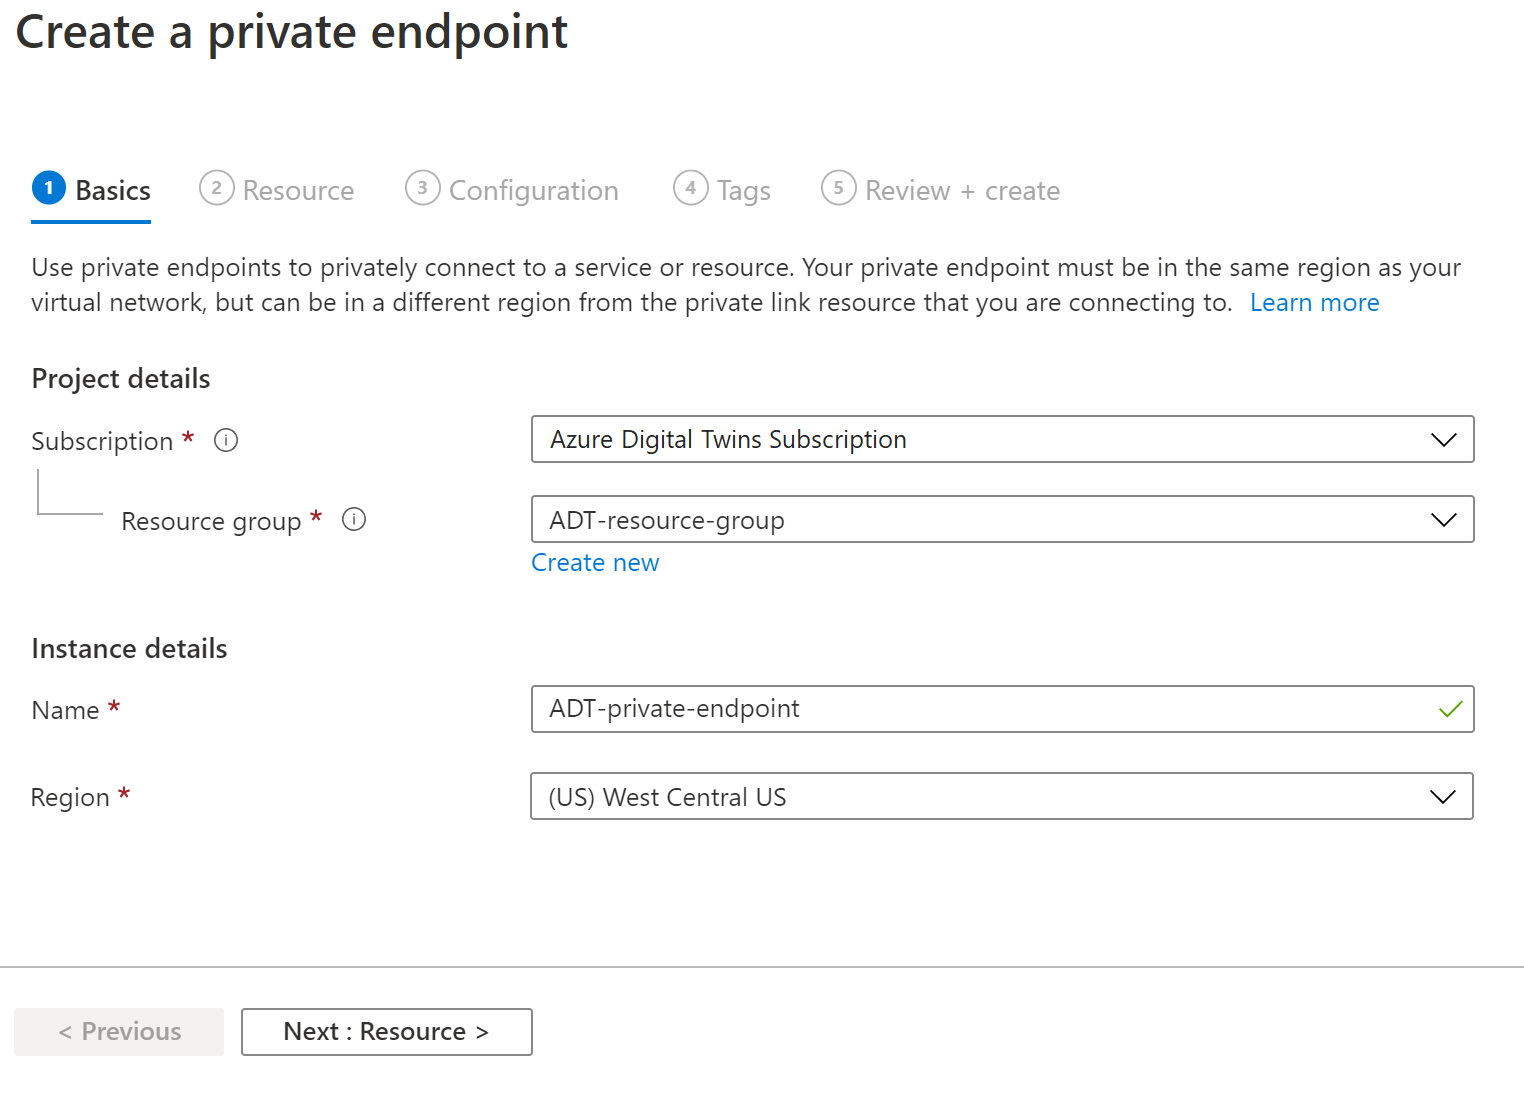 Screenshot of the Azure portal showing the first (Basics) tab of the Create a private endpoint dialog. It contains the fields described above.